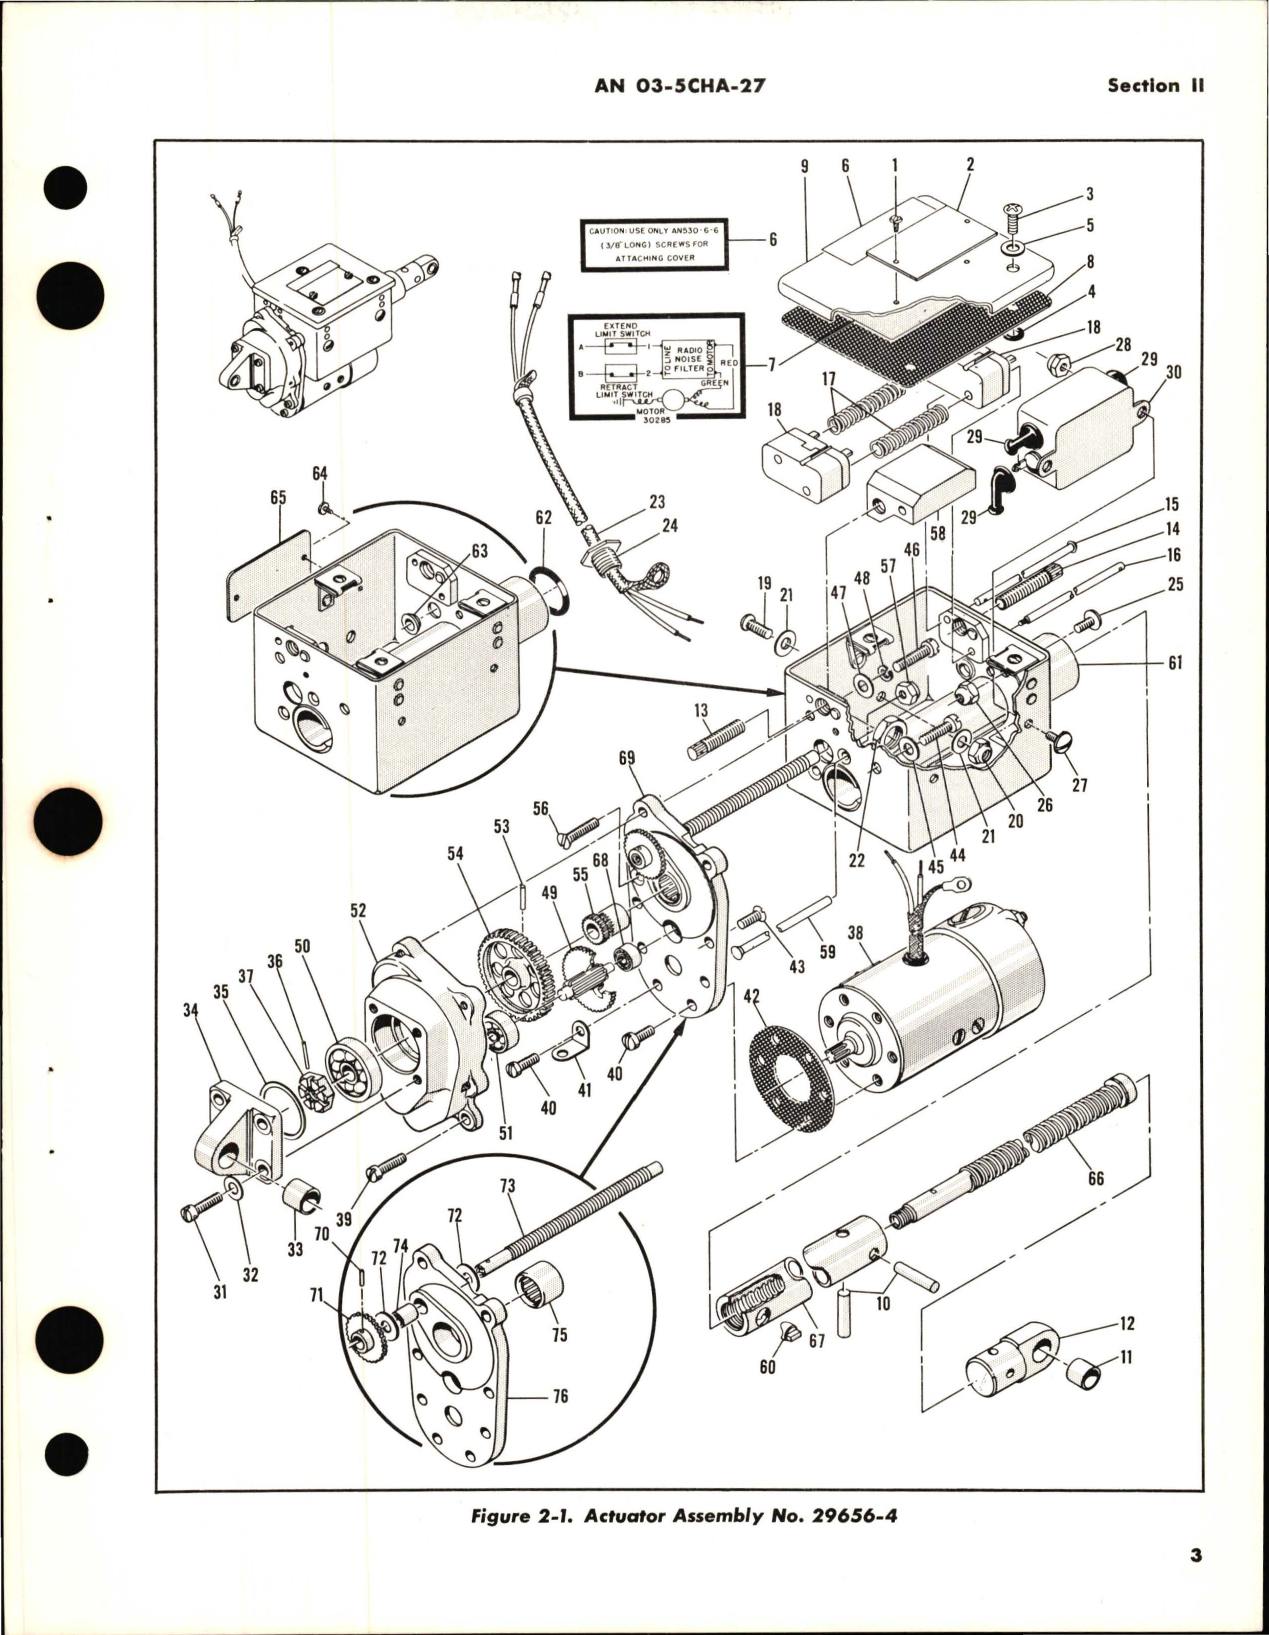 Sample page 5 from AirCorps Library document: Overhaul Instructions for Electromechanical Linear Actuators 